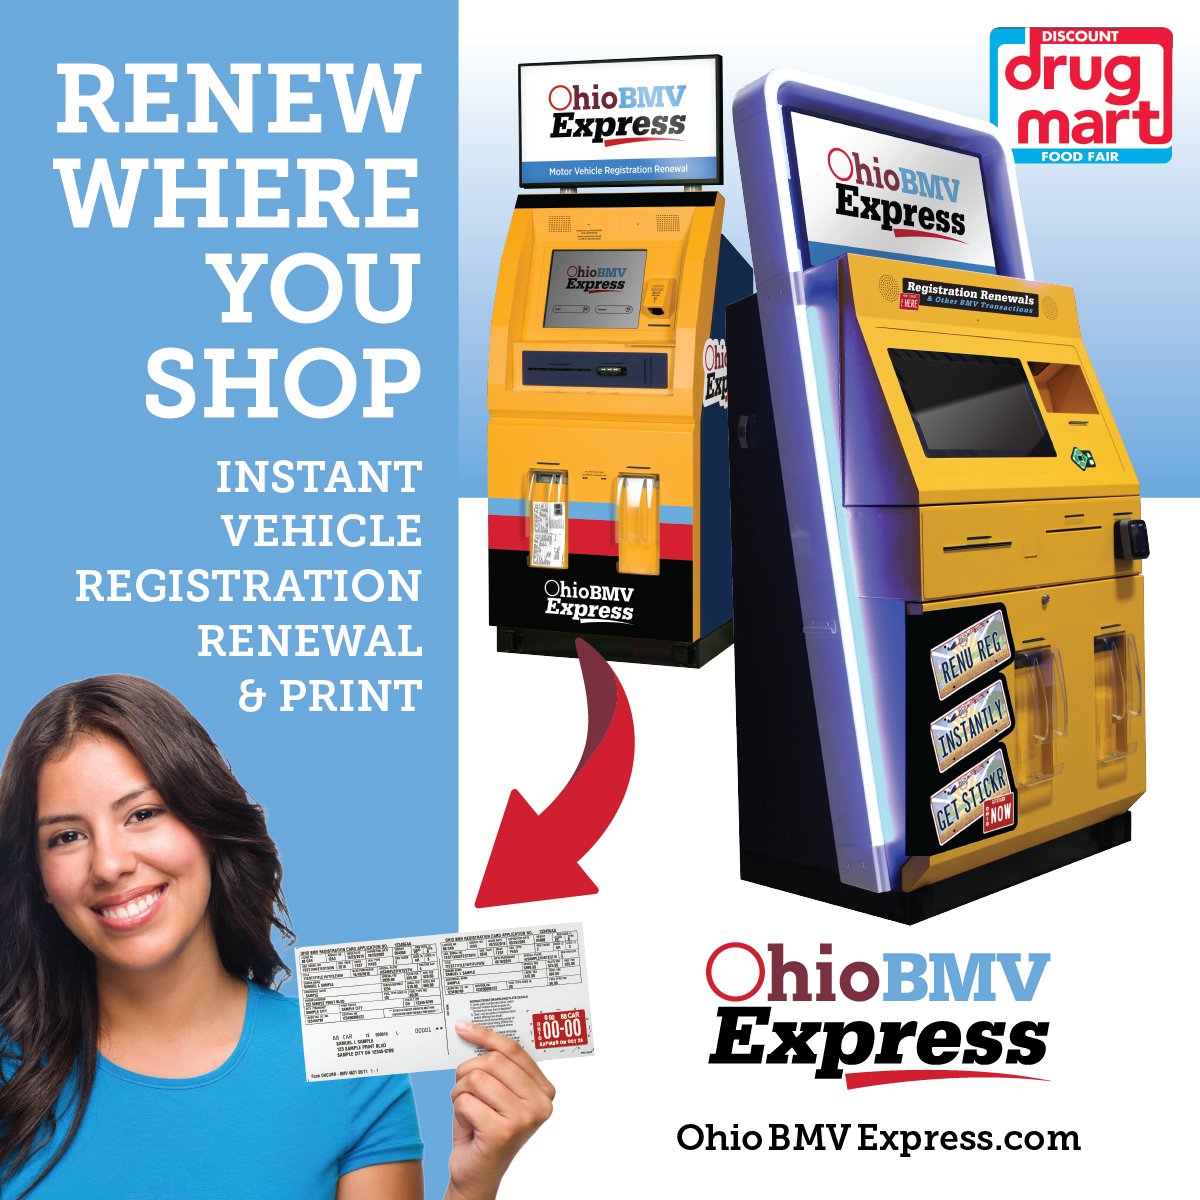 🚗 Renew your vehicle tags hassle-free! BMV Kiosks at Discount Drug Mart in Lakewood (15412 Detroit Ave.) & Cleveland (4170 Fulton Rd.) got you! Swing by, renew & print on the spot! Goodbye long lines, hello convenience! Kiosk Details: bit.ly/3T1mQHU #BMV #DDM #Ohio